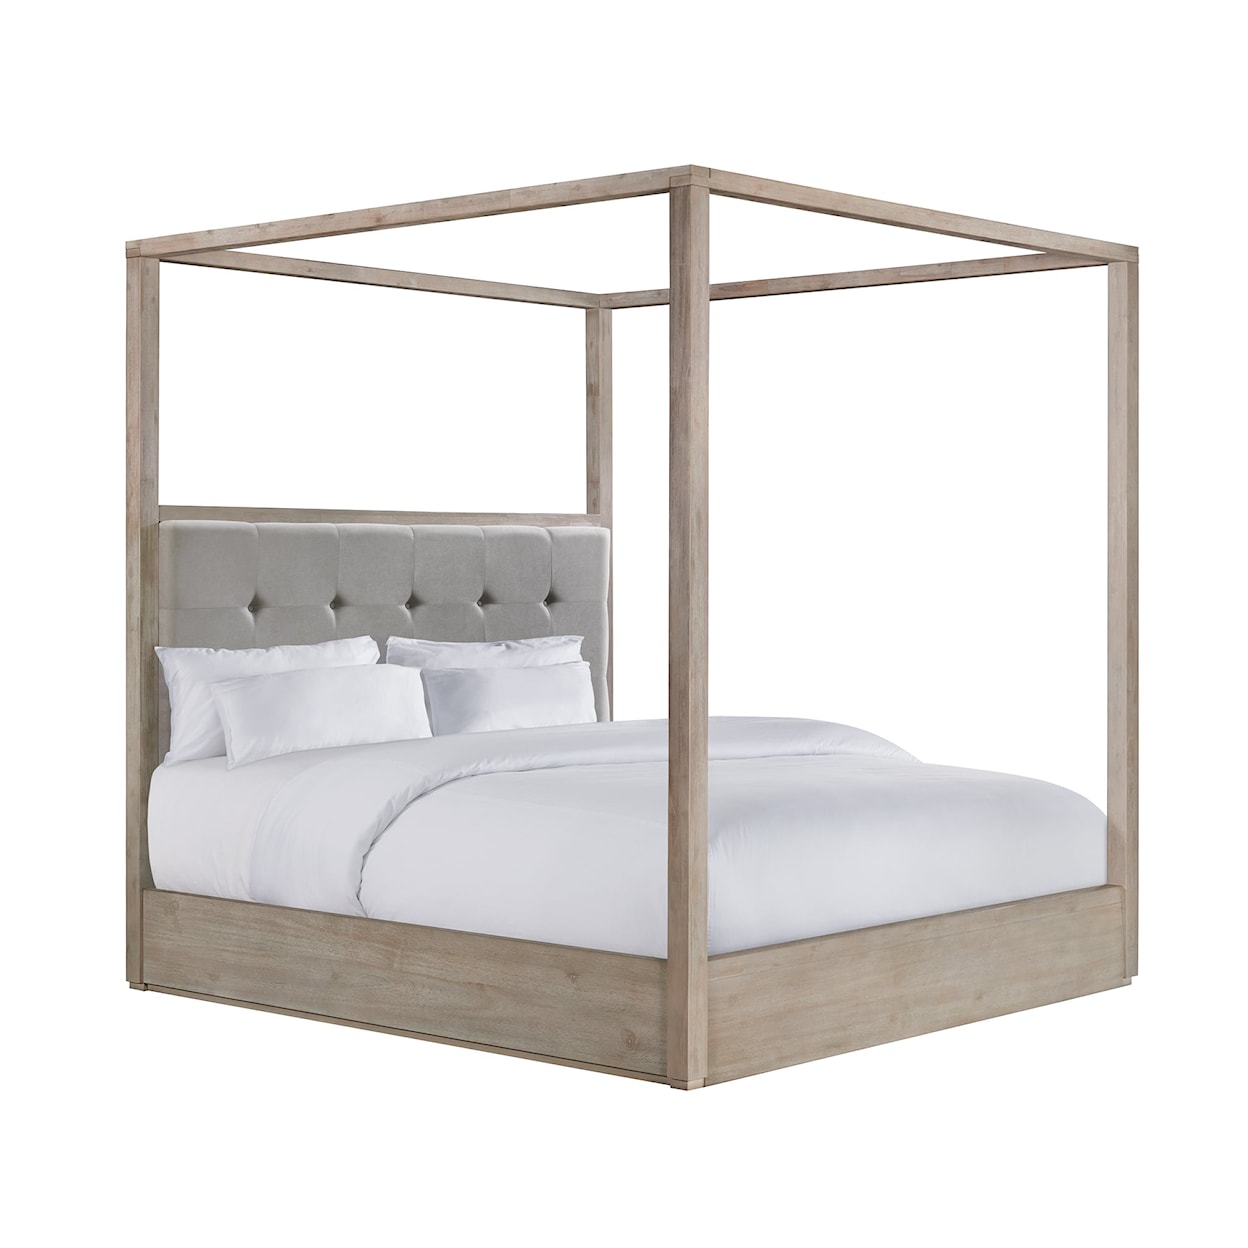 Elements Arcadia King Canopy Bed